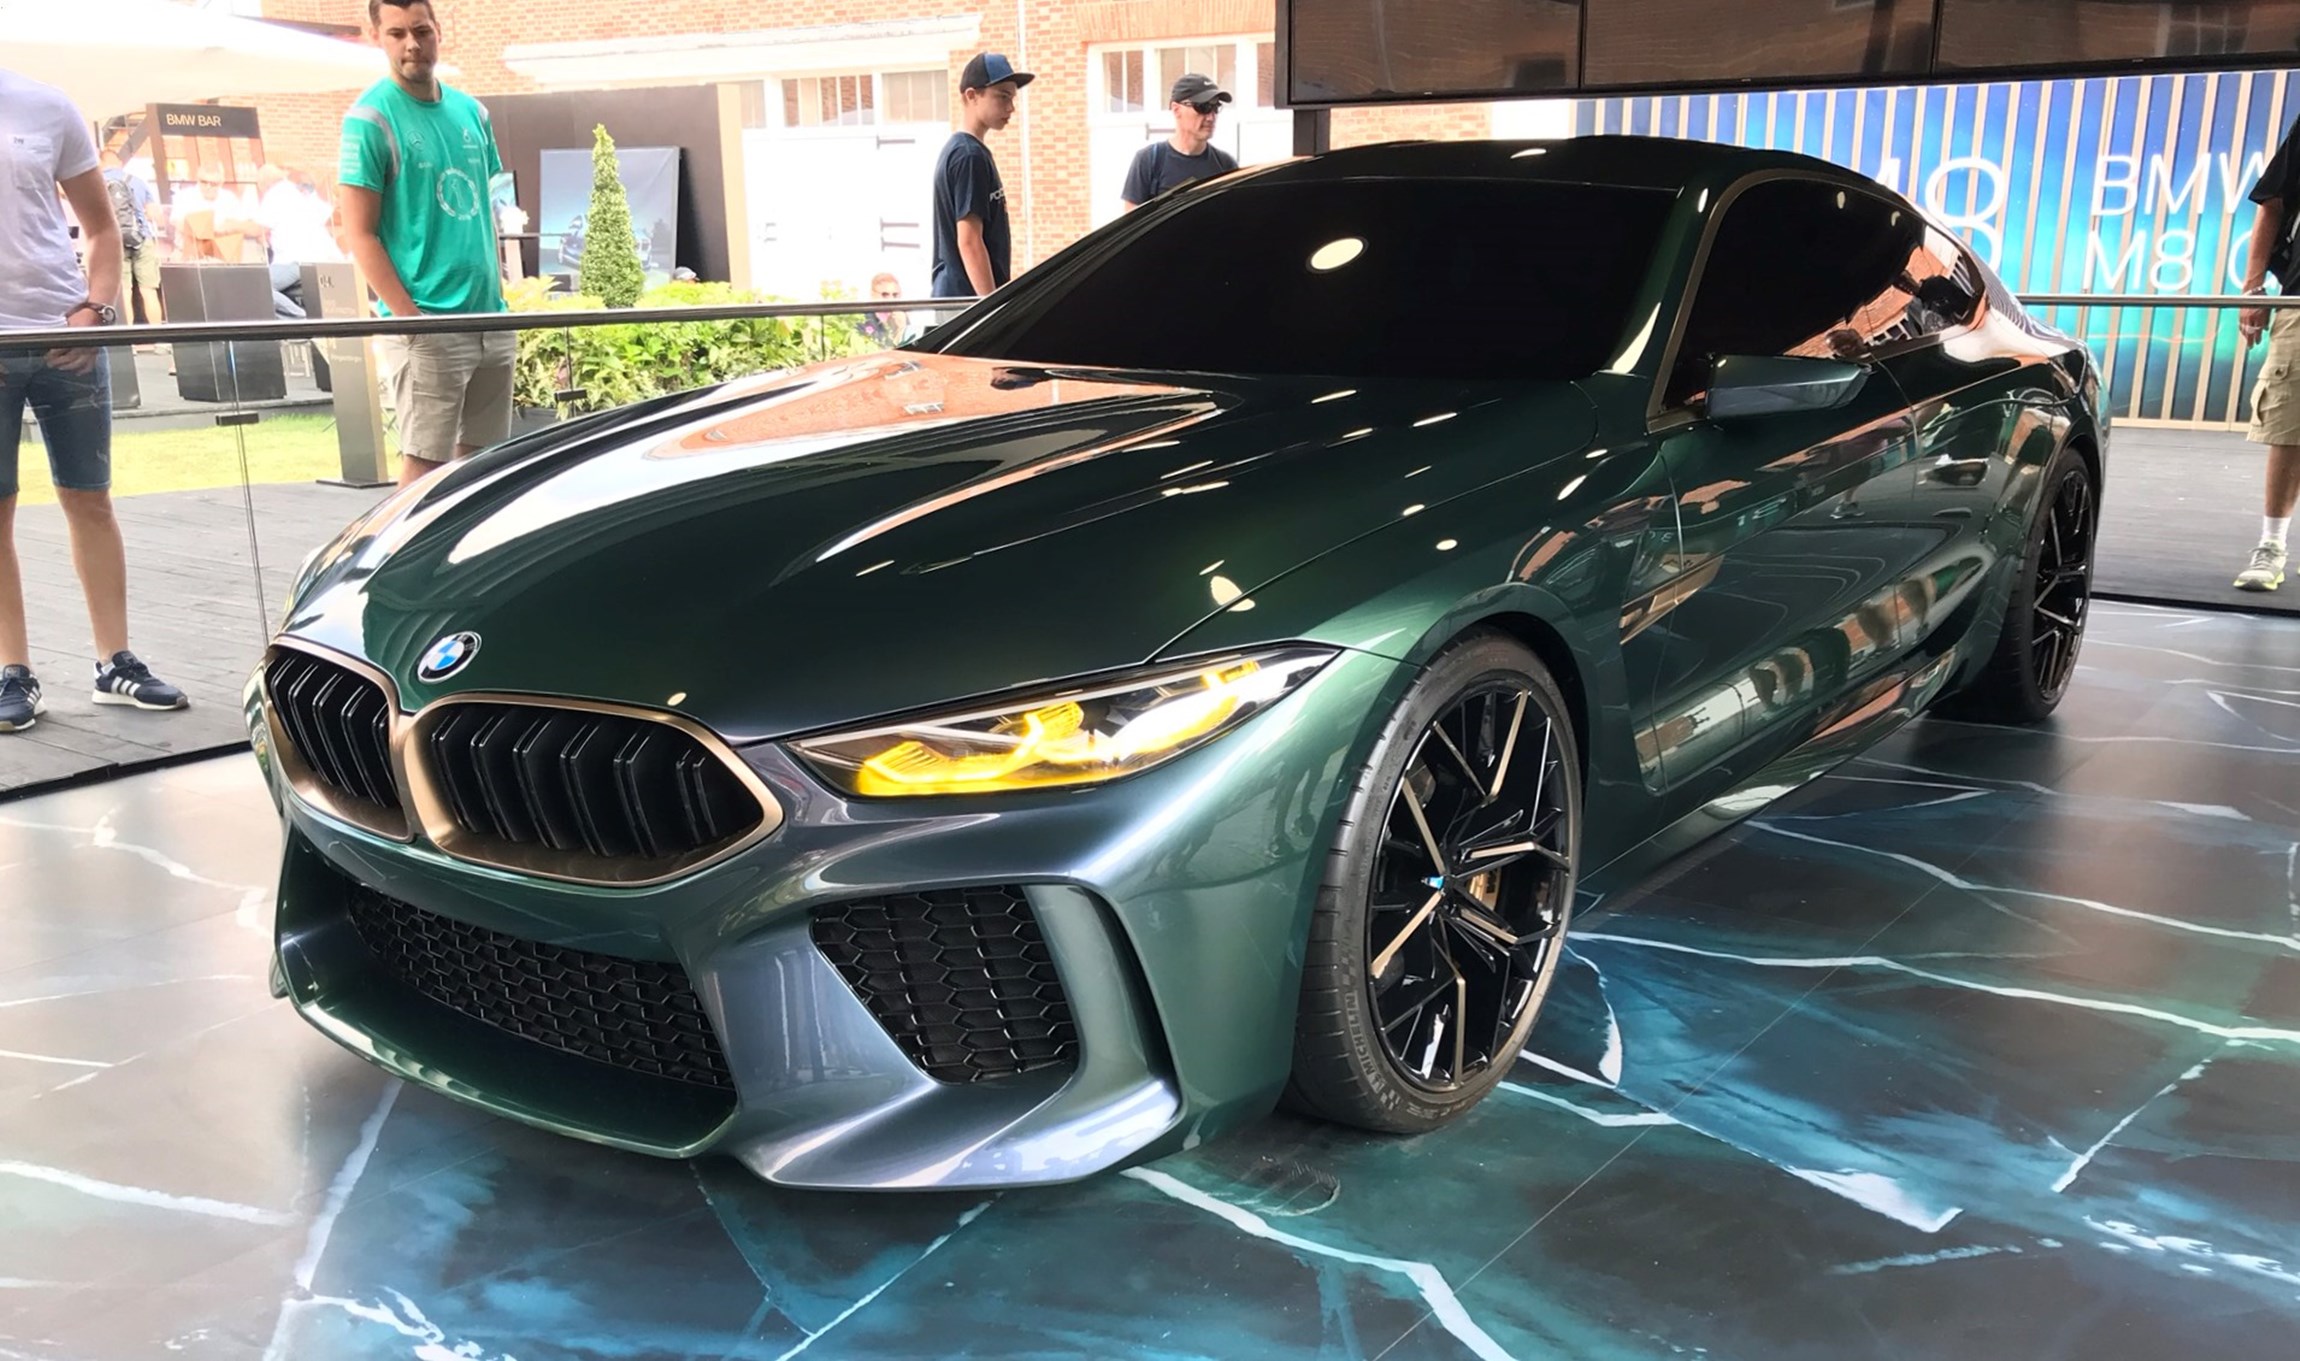 The Future Of Luxury: The 2018 BMW M8 Gran Coupe Concept